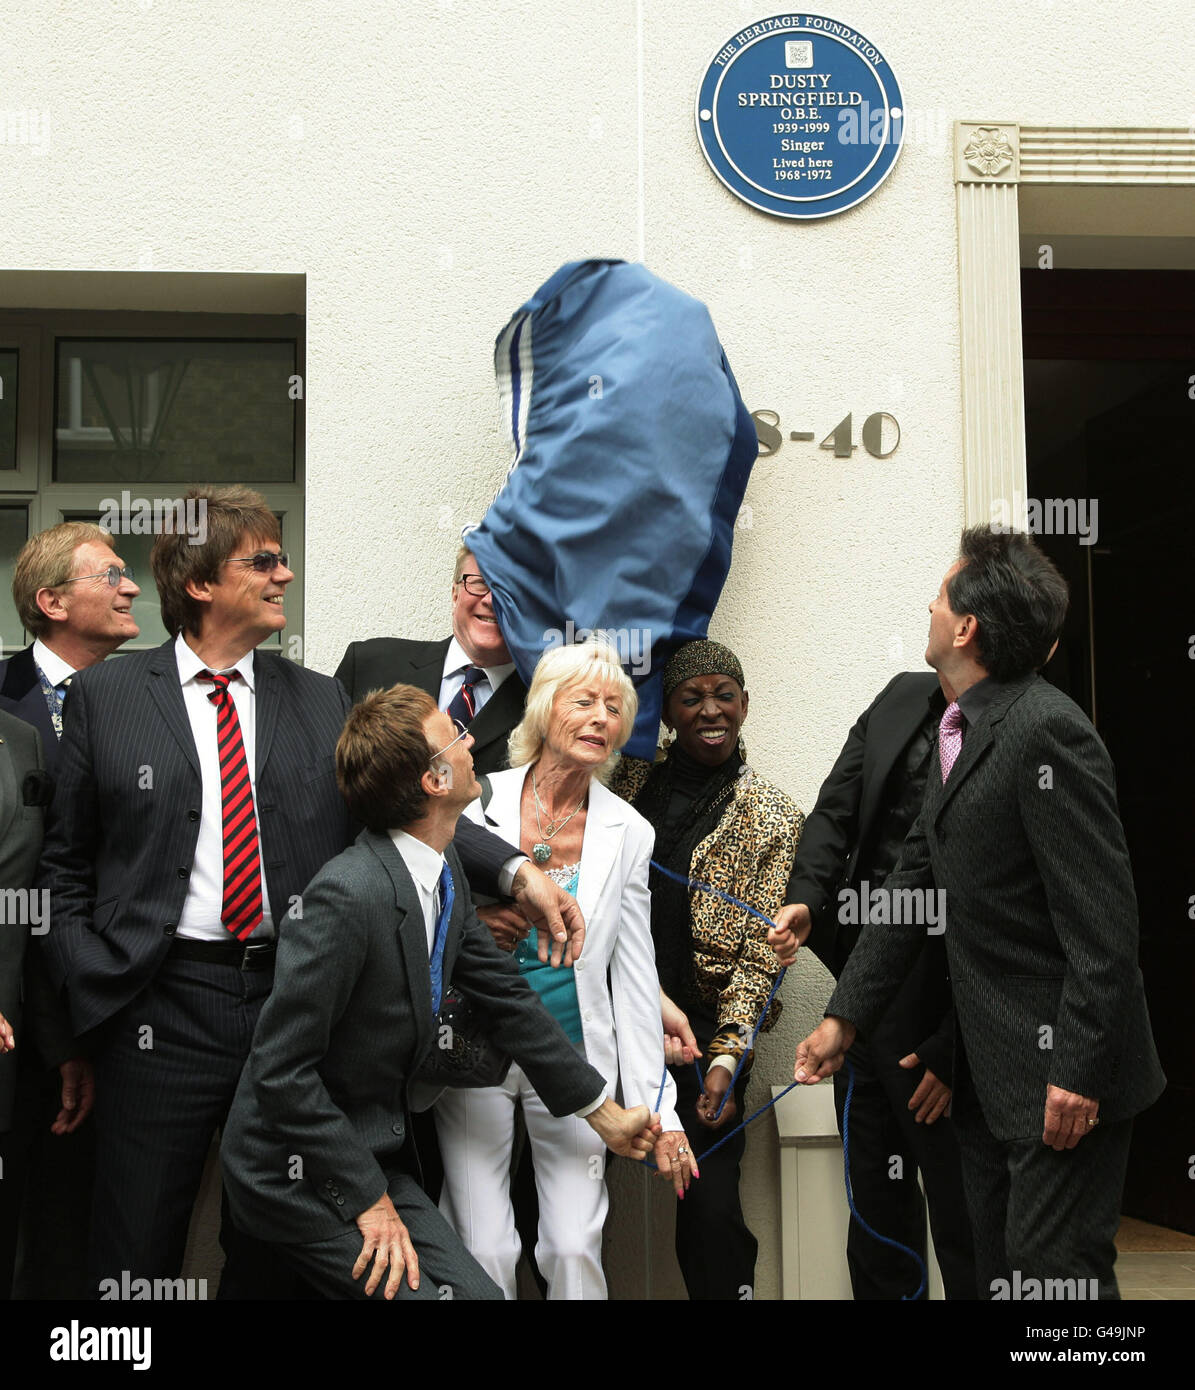 (from 2nd left) Mike Read, Robin Gibb, David Kid Jensen (partially obscured), Pat Rhodes (Dusty's former secretary) and Madeline Bell (one of Dusty's former backing singers) attending the unveiling of a Heritage Foundation blue plaque at a former home of Dusty Springfield, at 38-40 Aubrey Walk in Kensington, London. Stock Photo